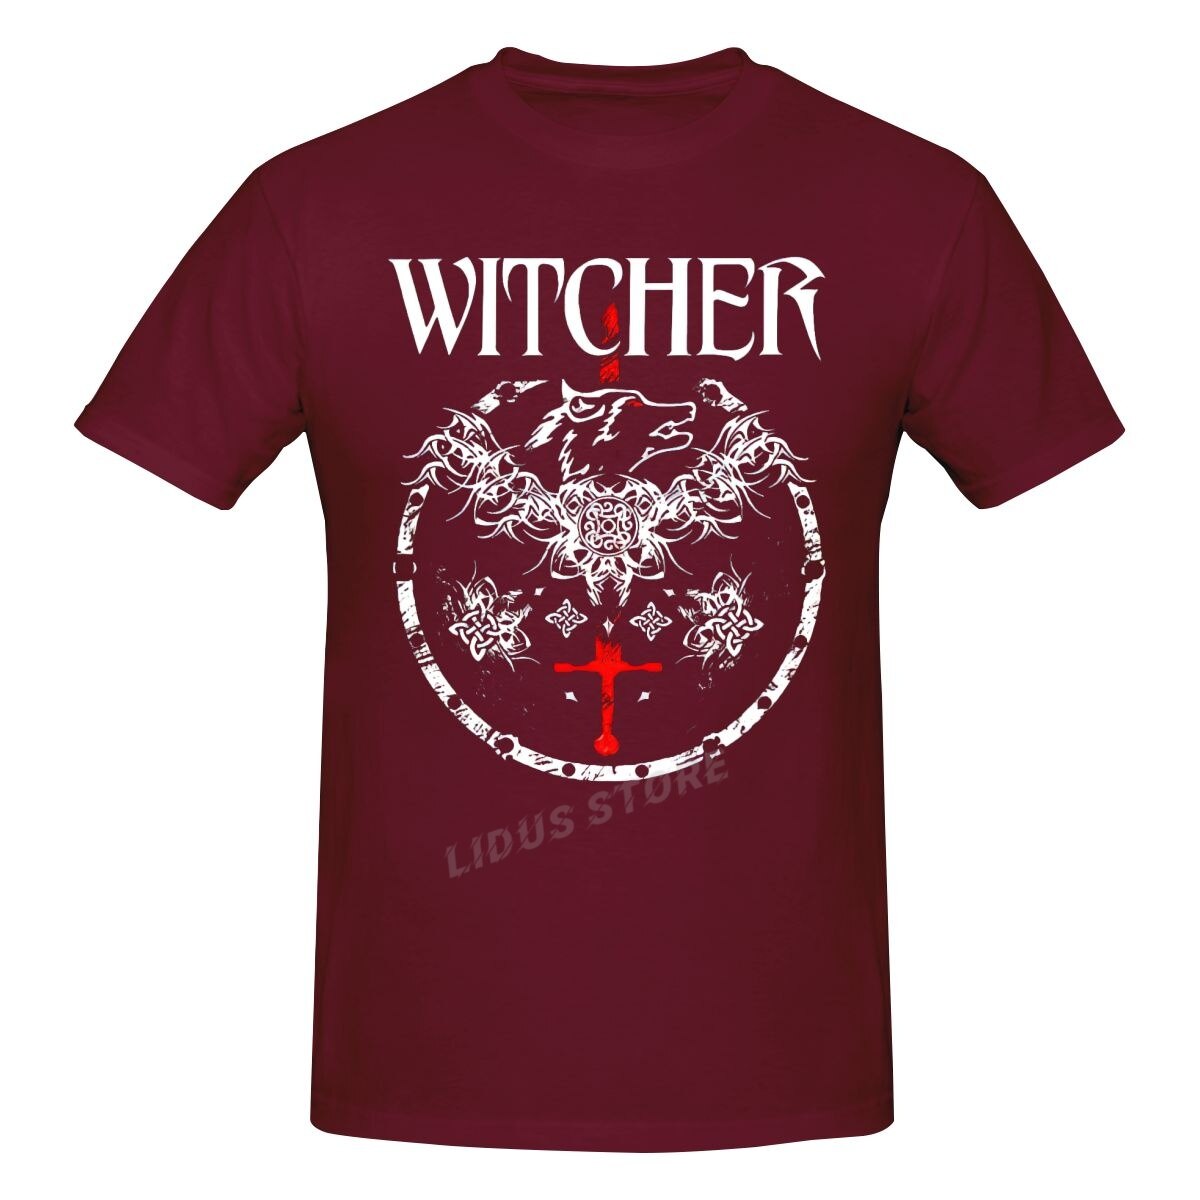 The Witcher T-Shirt Collection 2 (Variants Available)